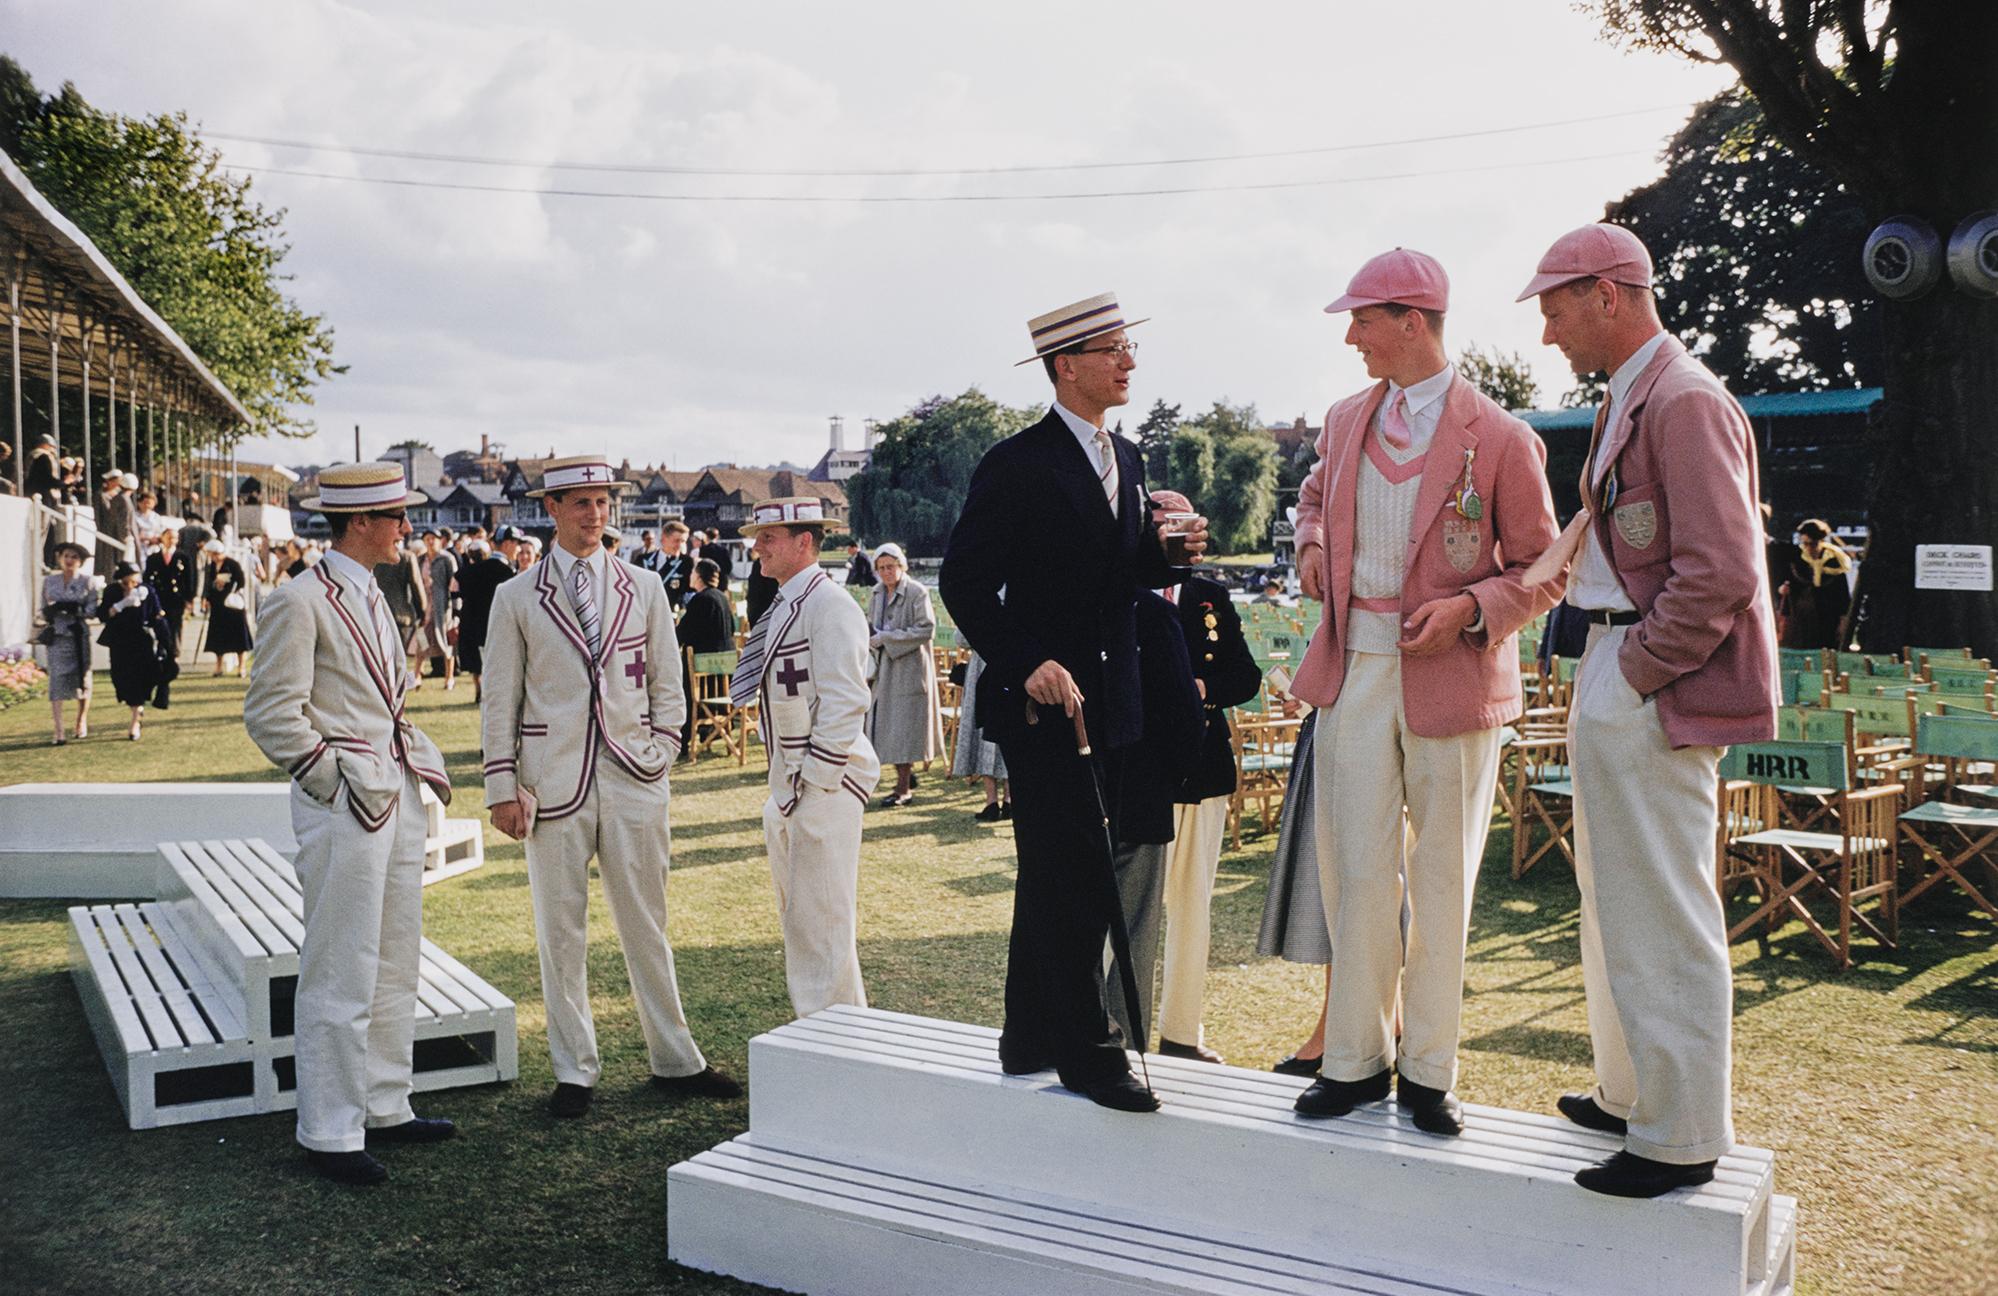 Henley Regatta 
1955
Chromogenic Lambda Print
Estate stamped and hand numbered edition of 150 with certificate of authenticity from the estate. 

The Henley Regatta at Henley-on-Thames on the River Thames, circa 1955. 

Slim Aarons (1916-2006)